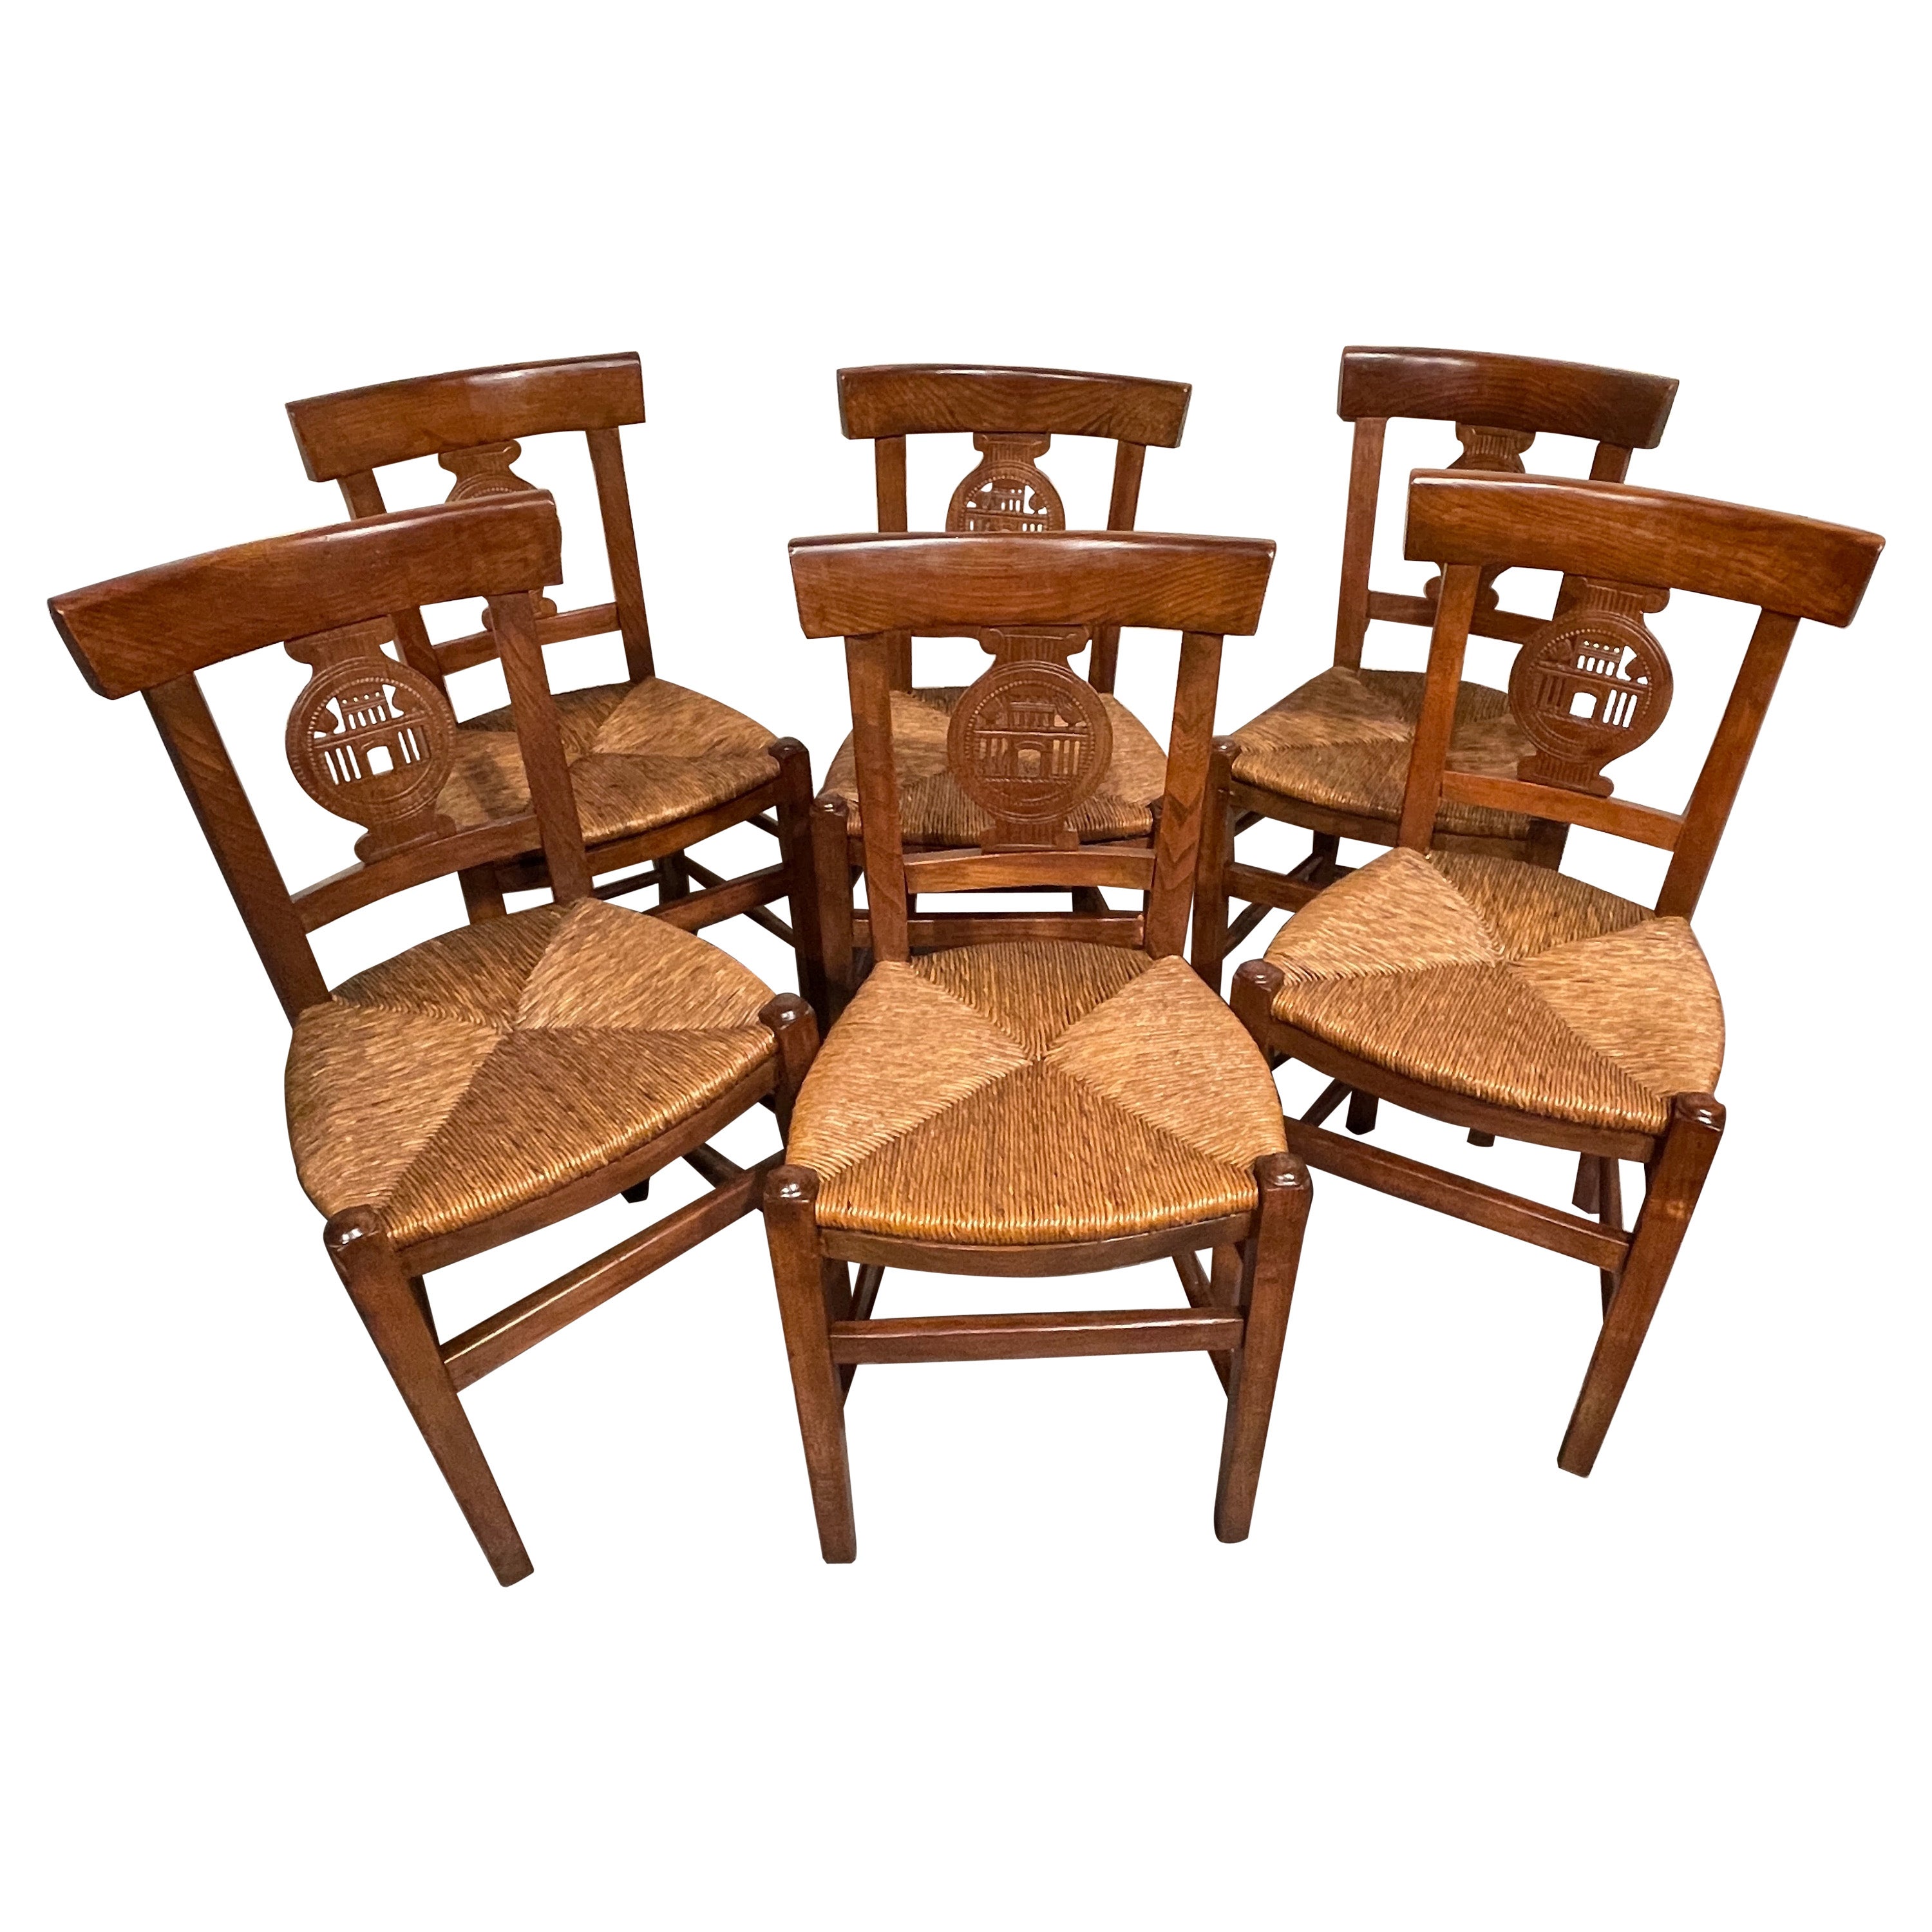 Set of Six Worpsweder Chairs, Germany, 19th Century